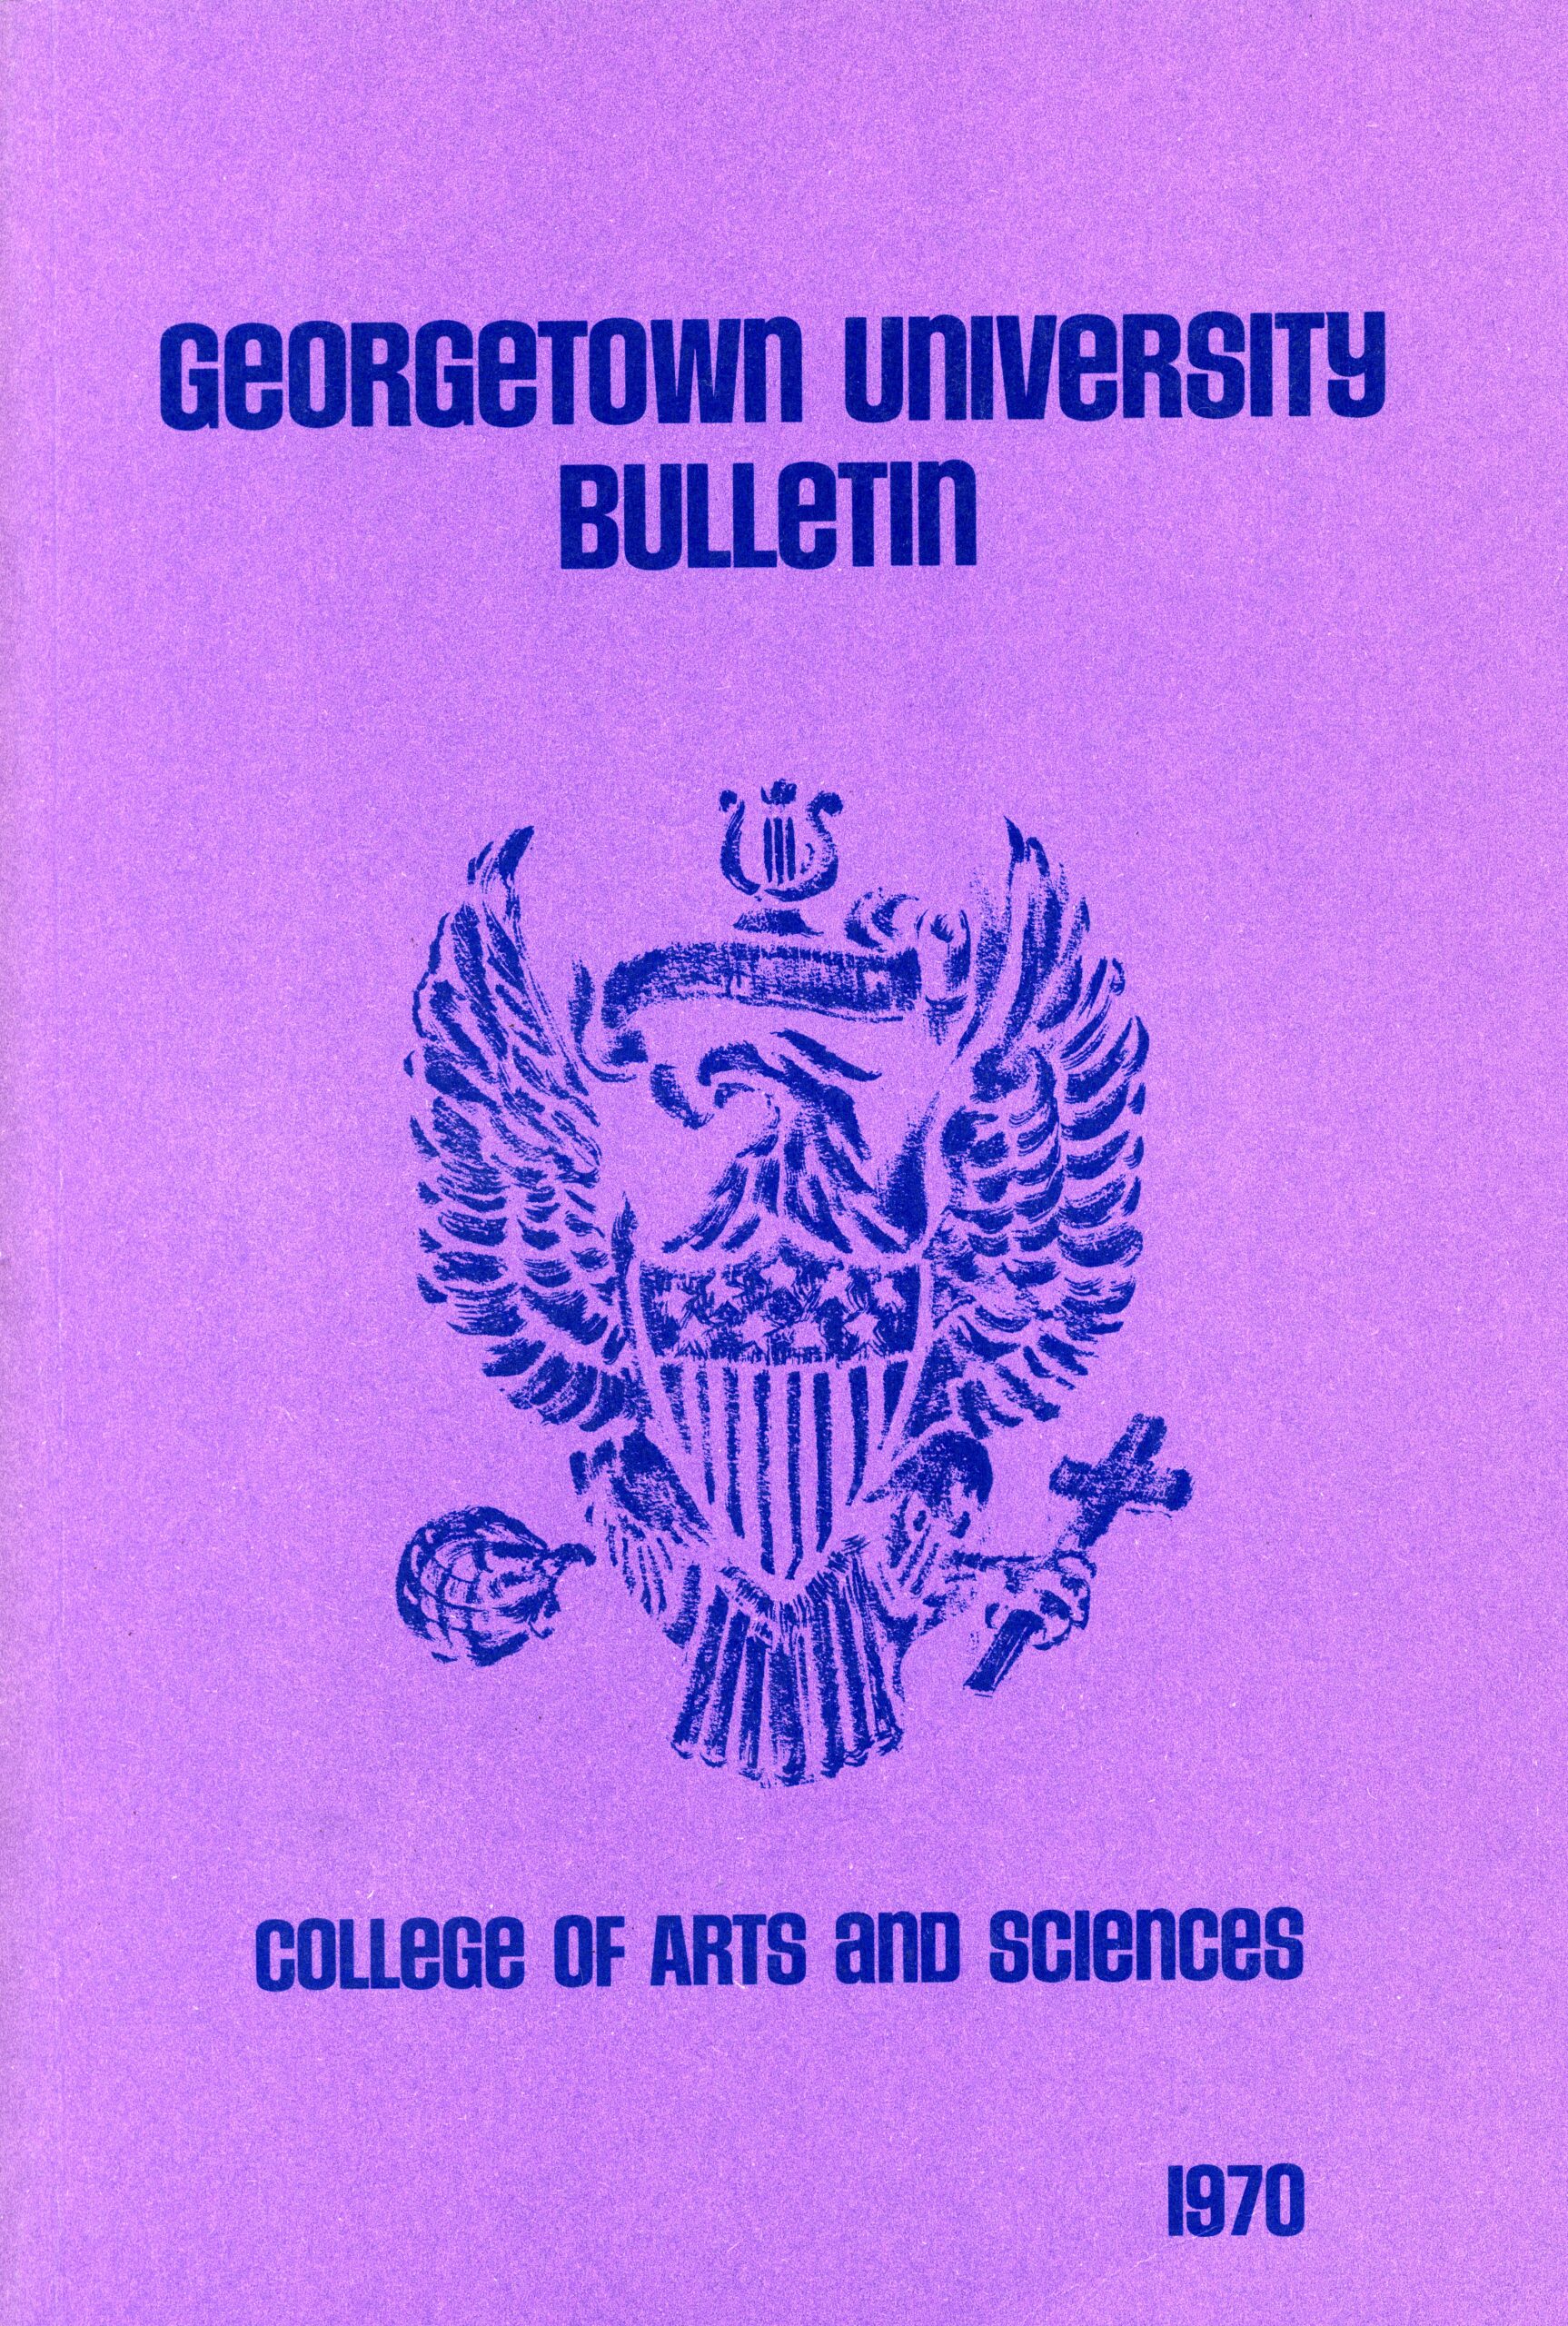 The purple cover of a 1970 Georgetown University Bulletin.